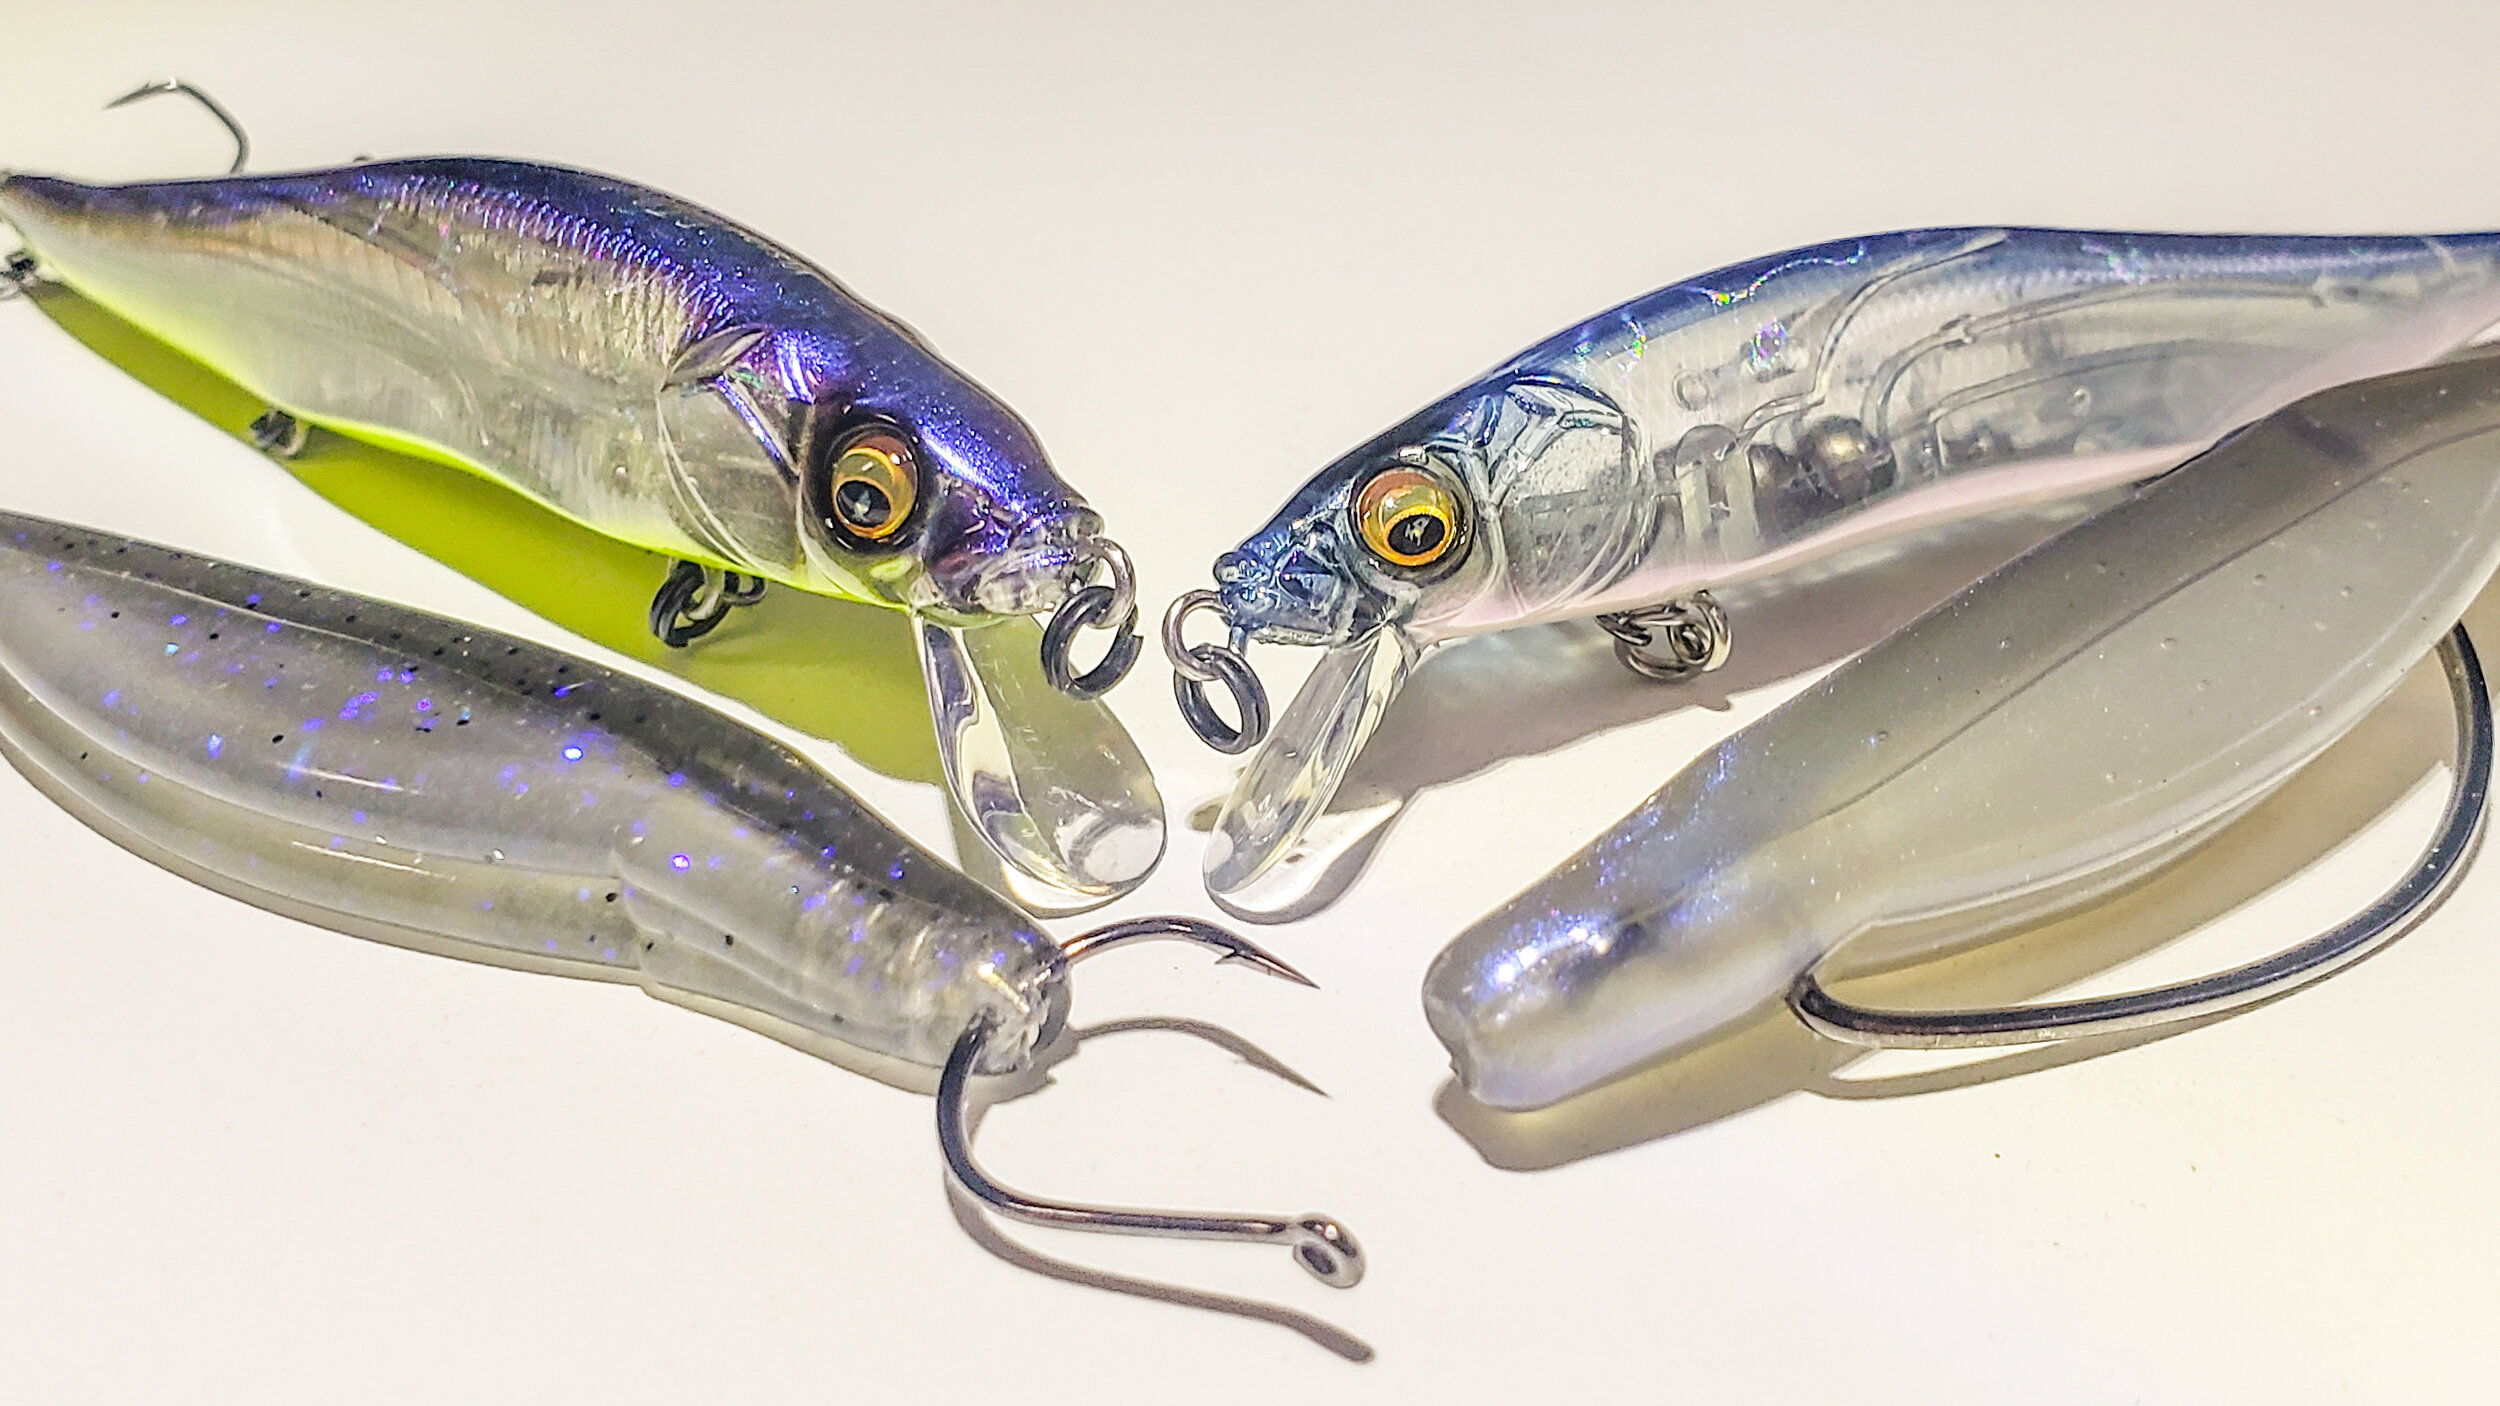 100 Custom Bass jigs 1//4 oz with under spin blade and 3//0 hook white